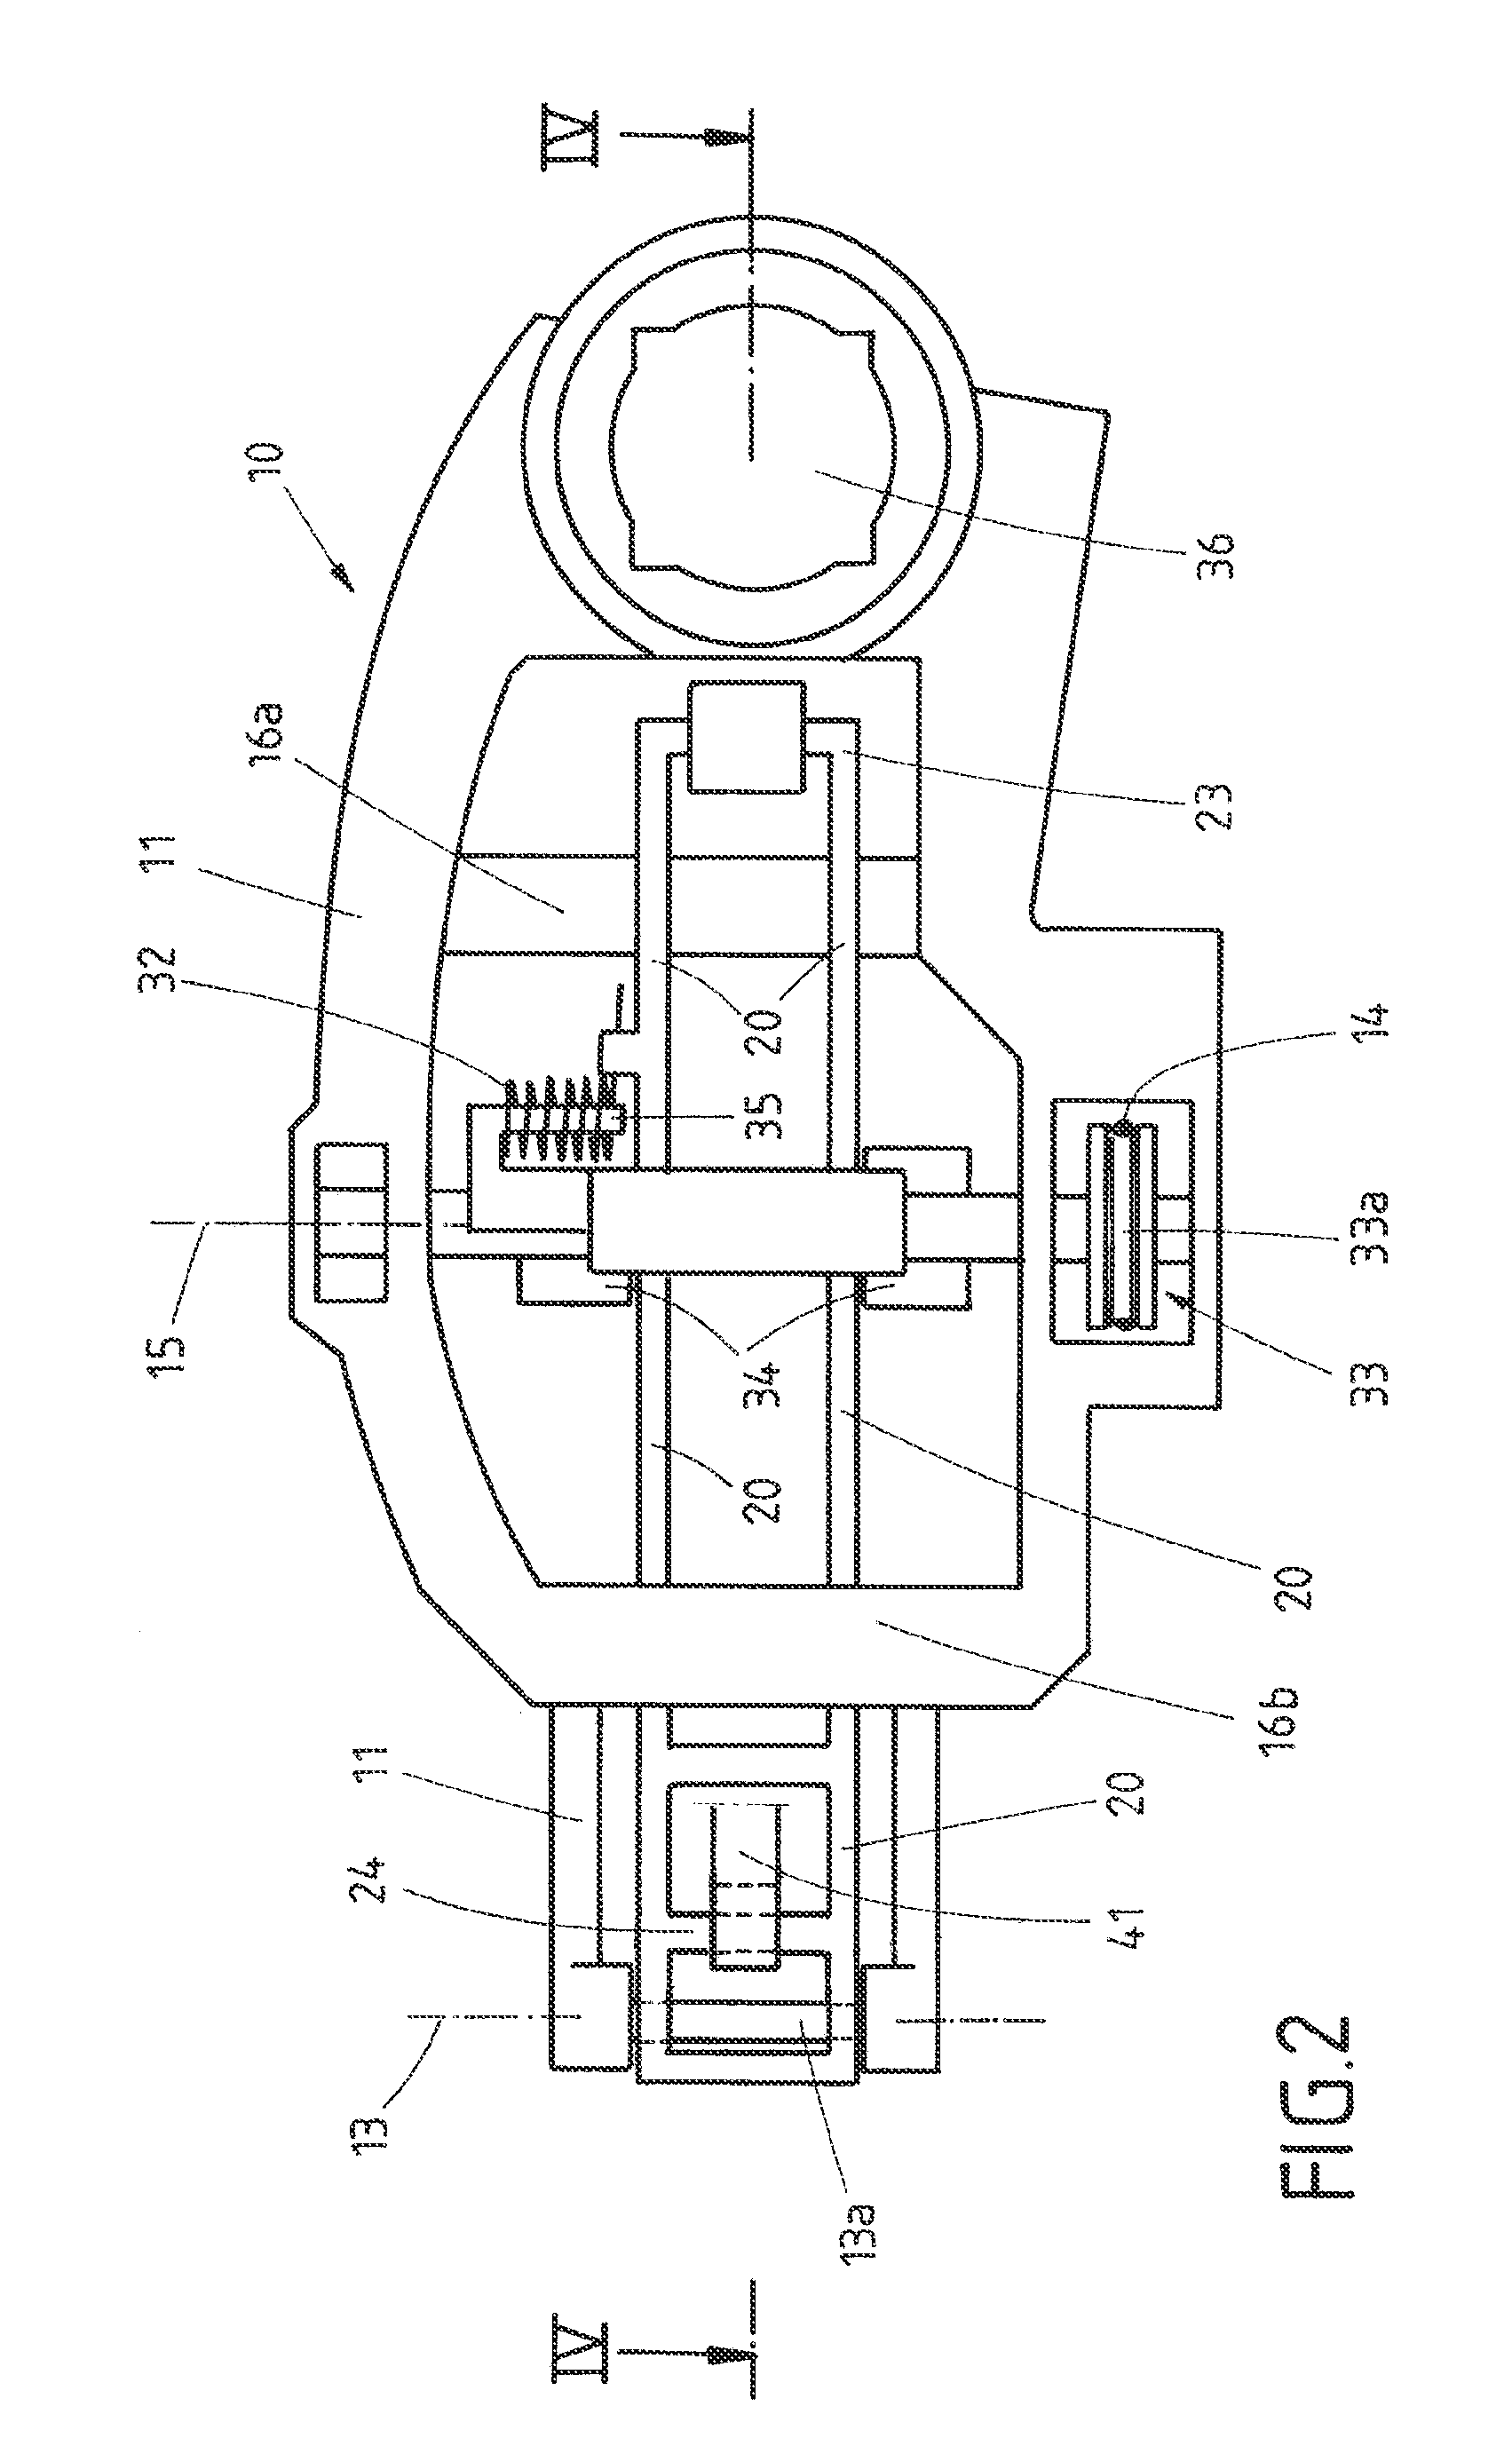 Device for actuating the closure of a movable part